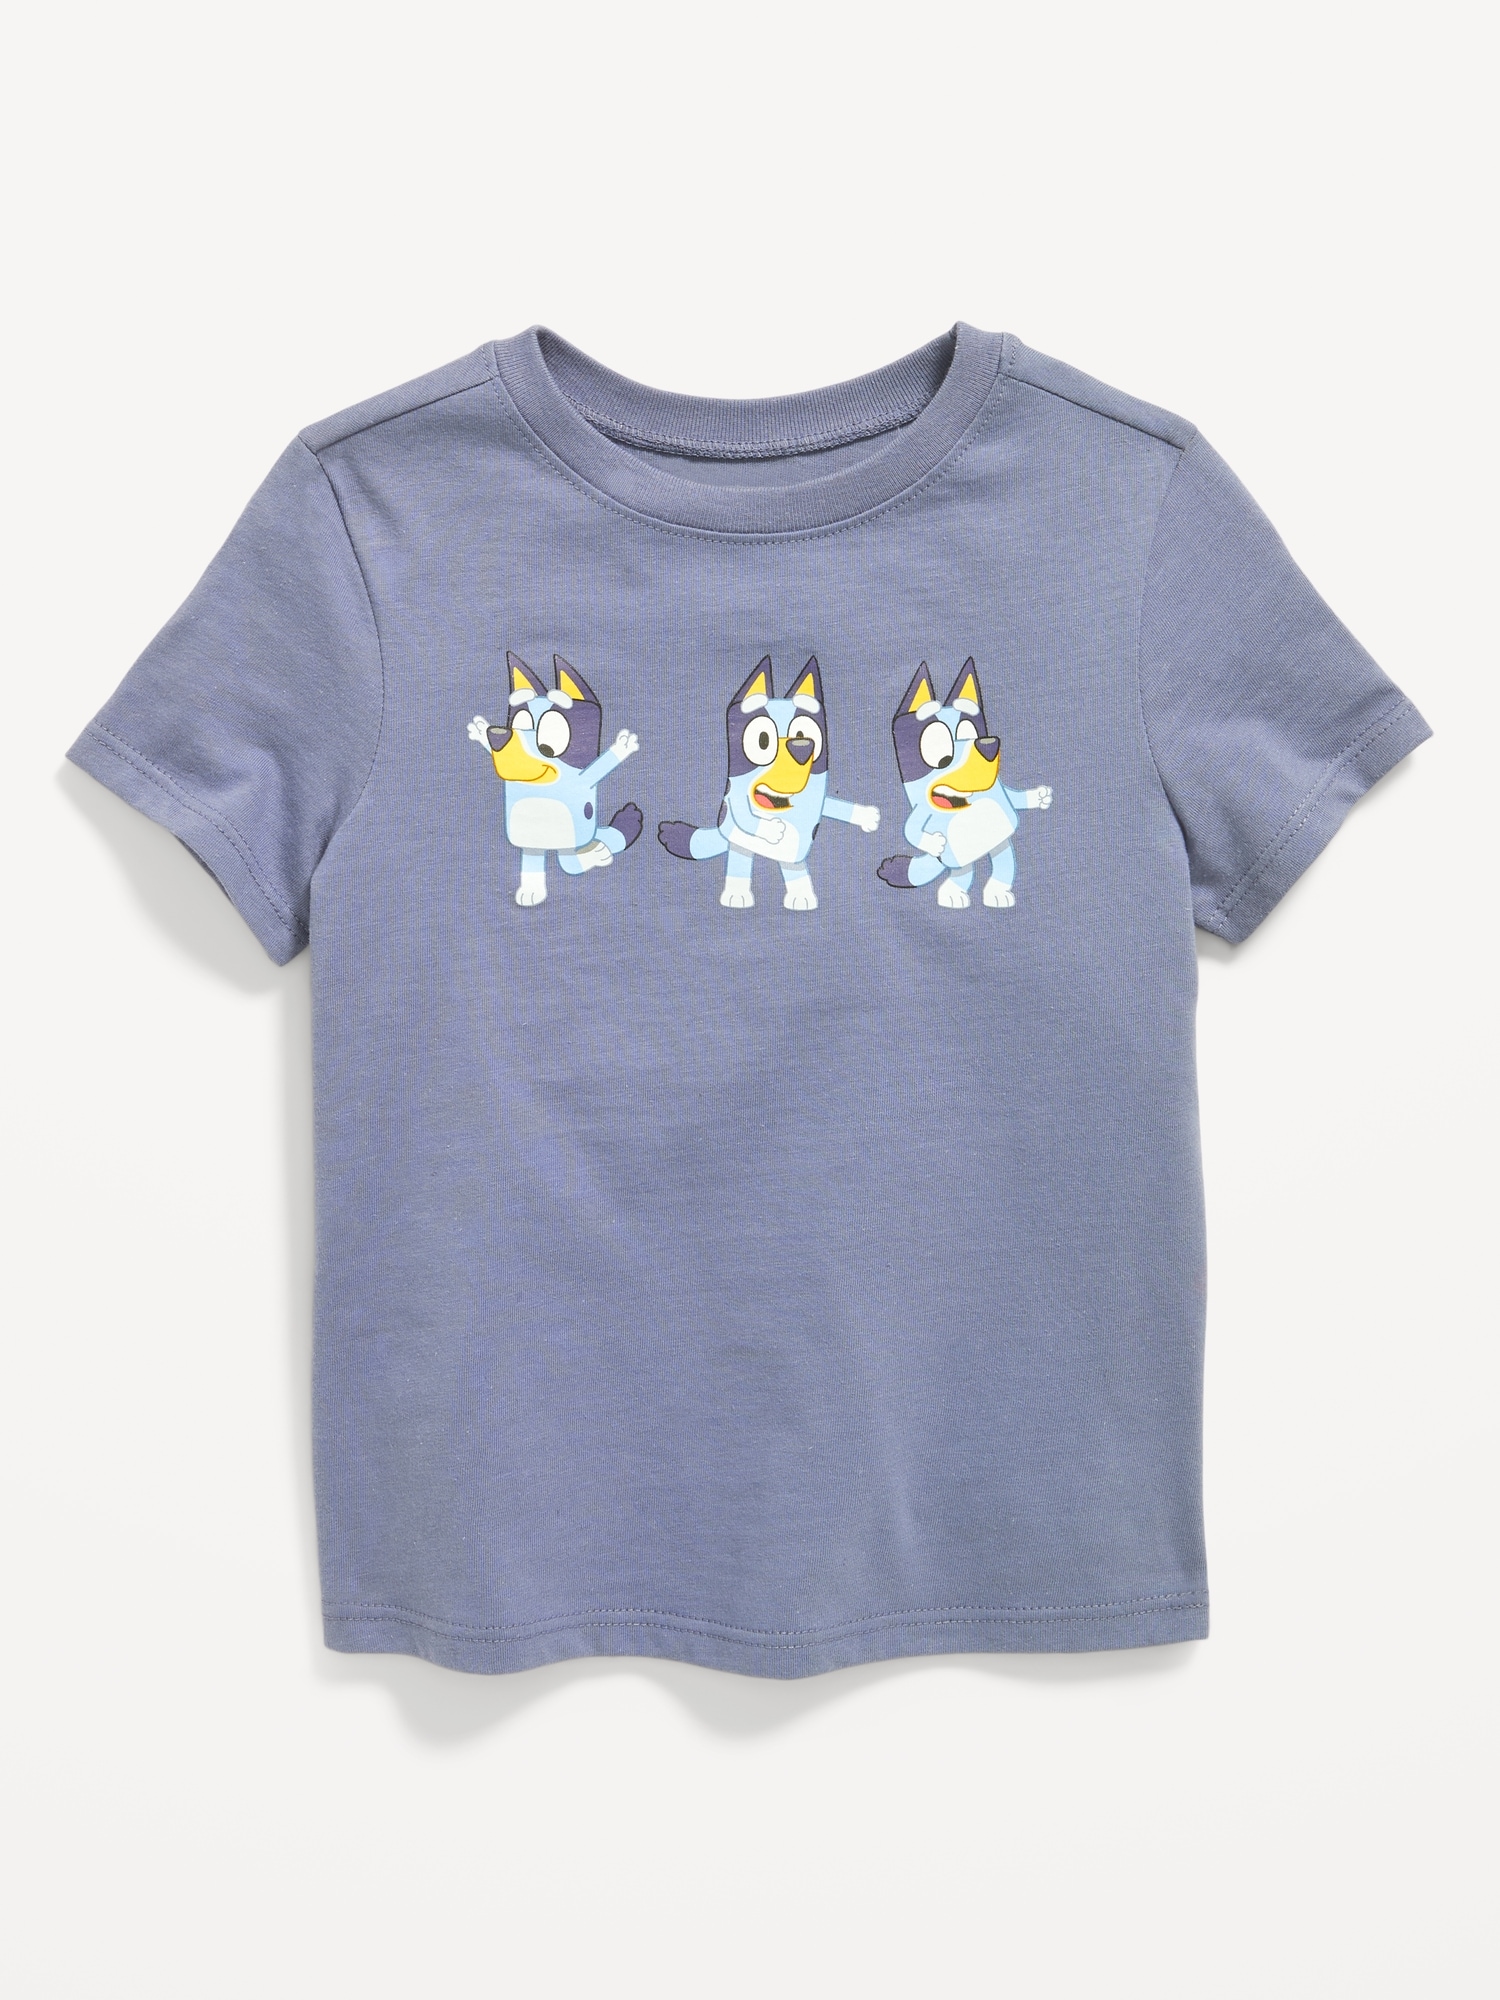 Bluey Unisex Graphic T-Shirt for Toddler Hot Deal